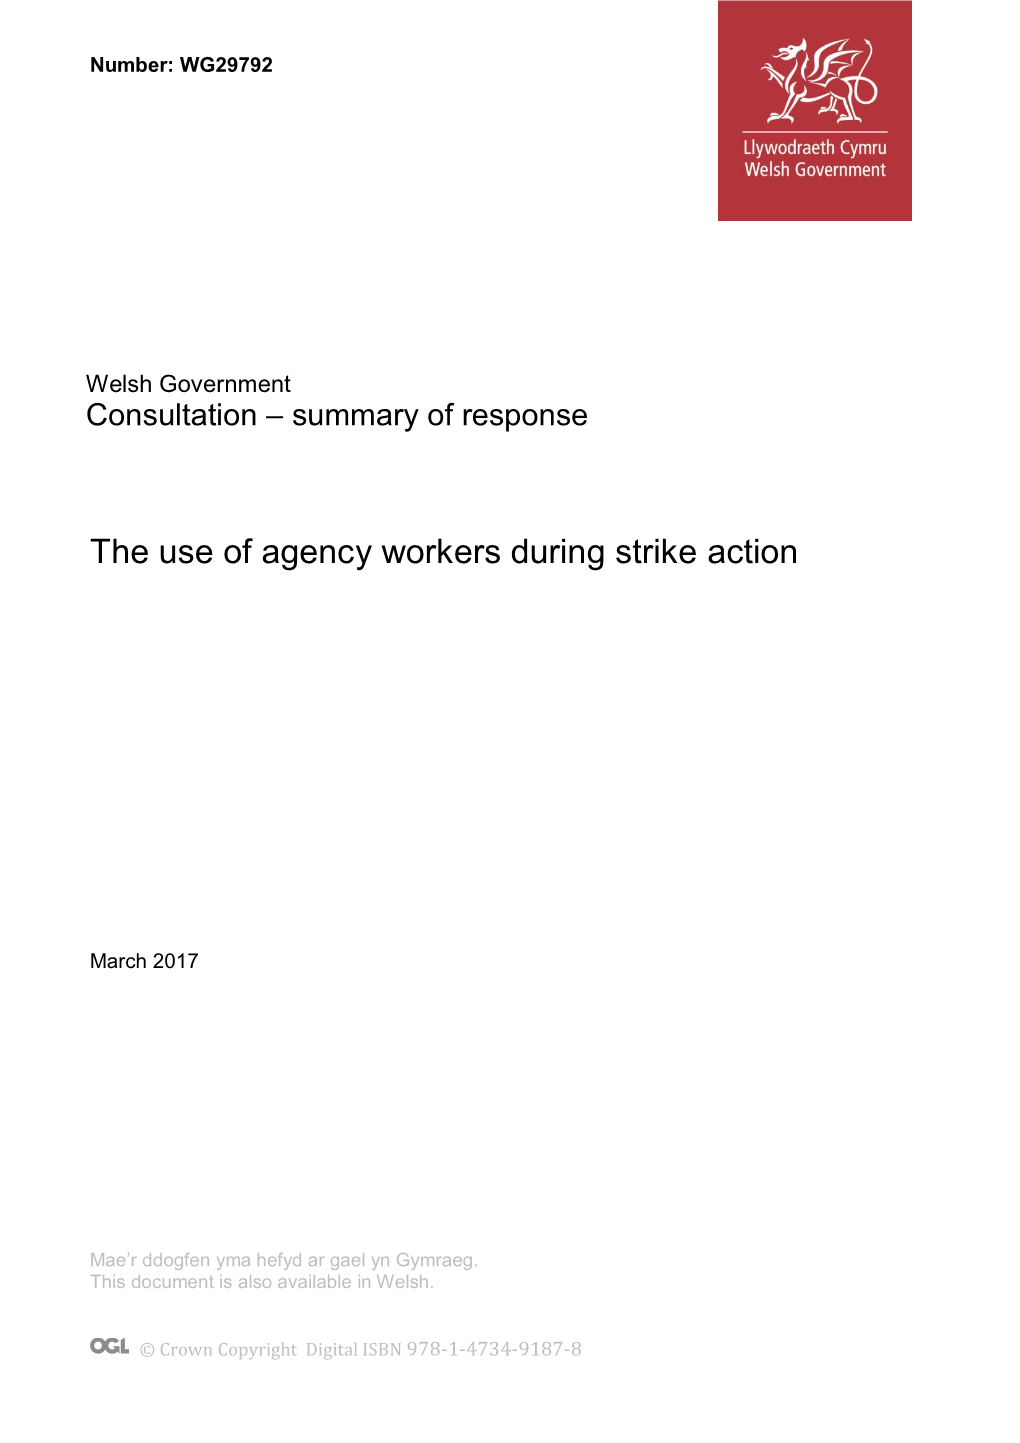 The Use of Agency Workers During Strike Action